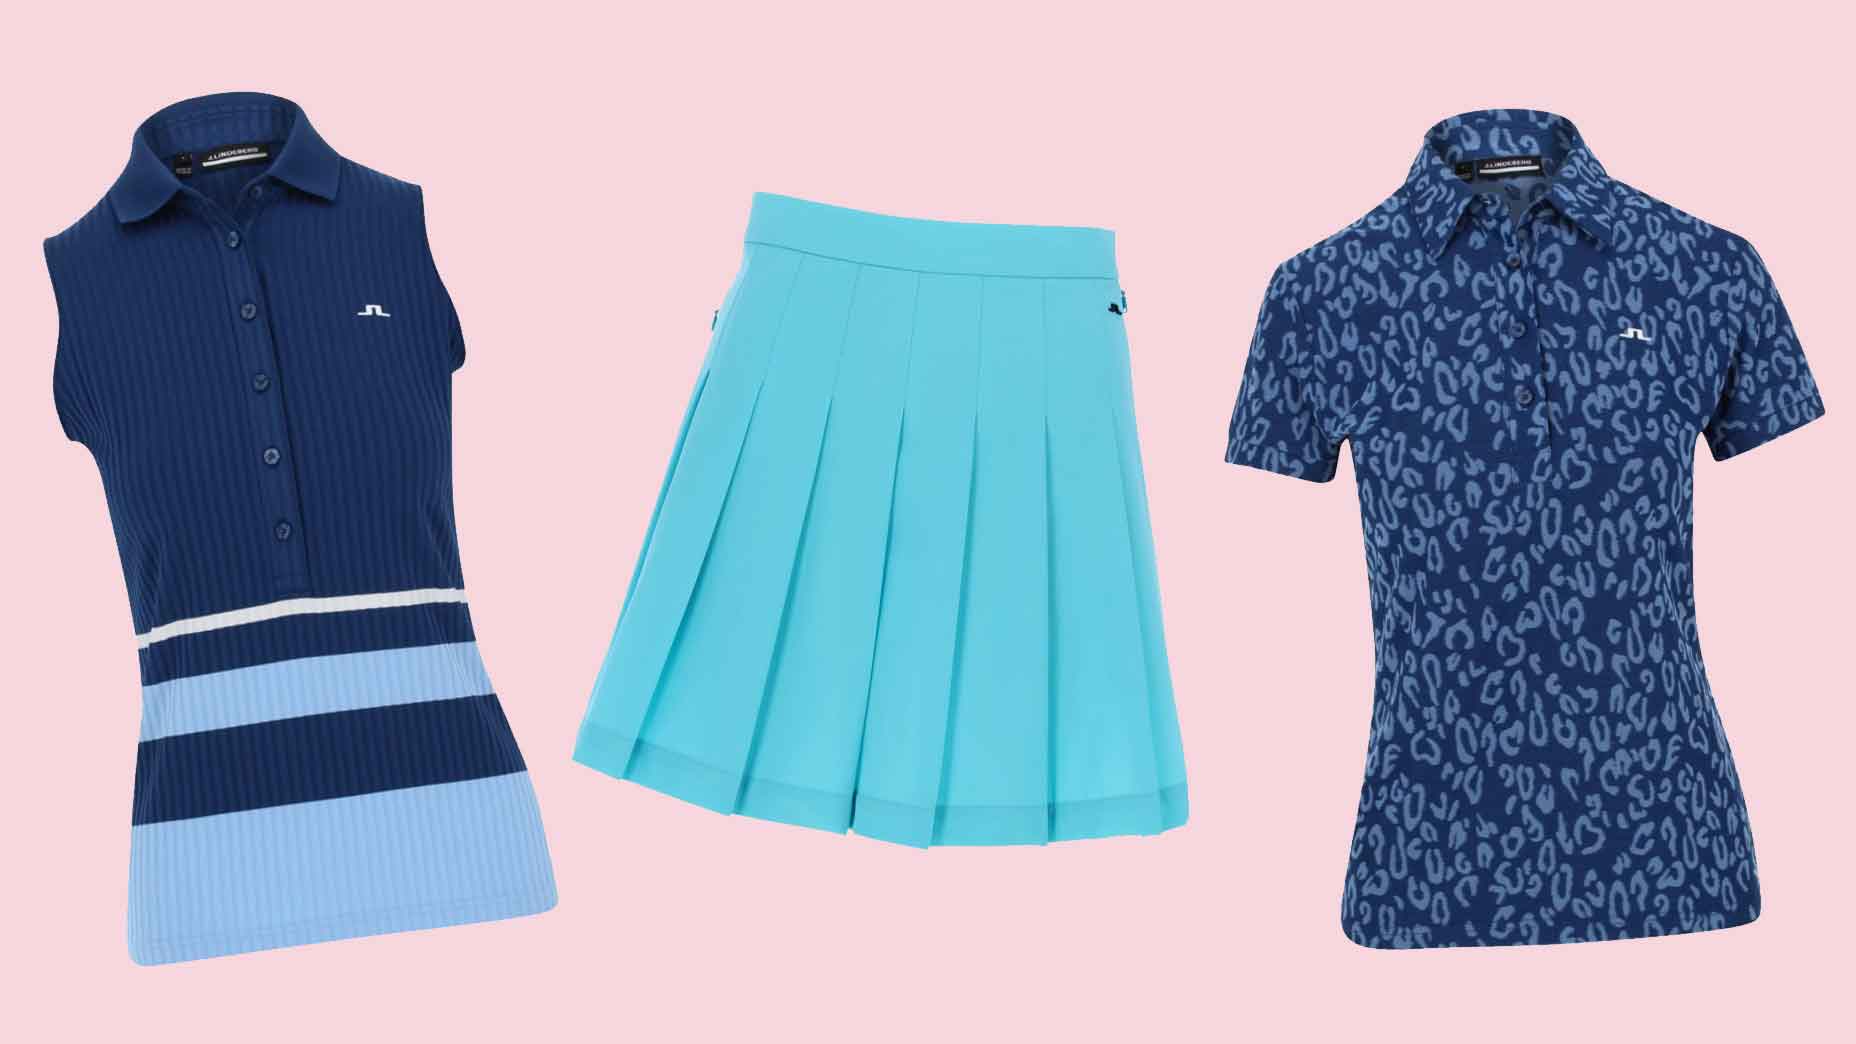 Gear up for spring golf with these 5 stylish new arrivals from J.Lindeberg